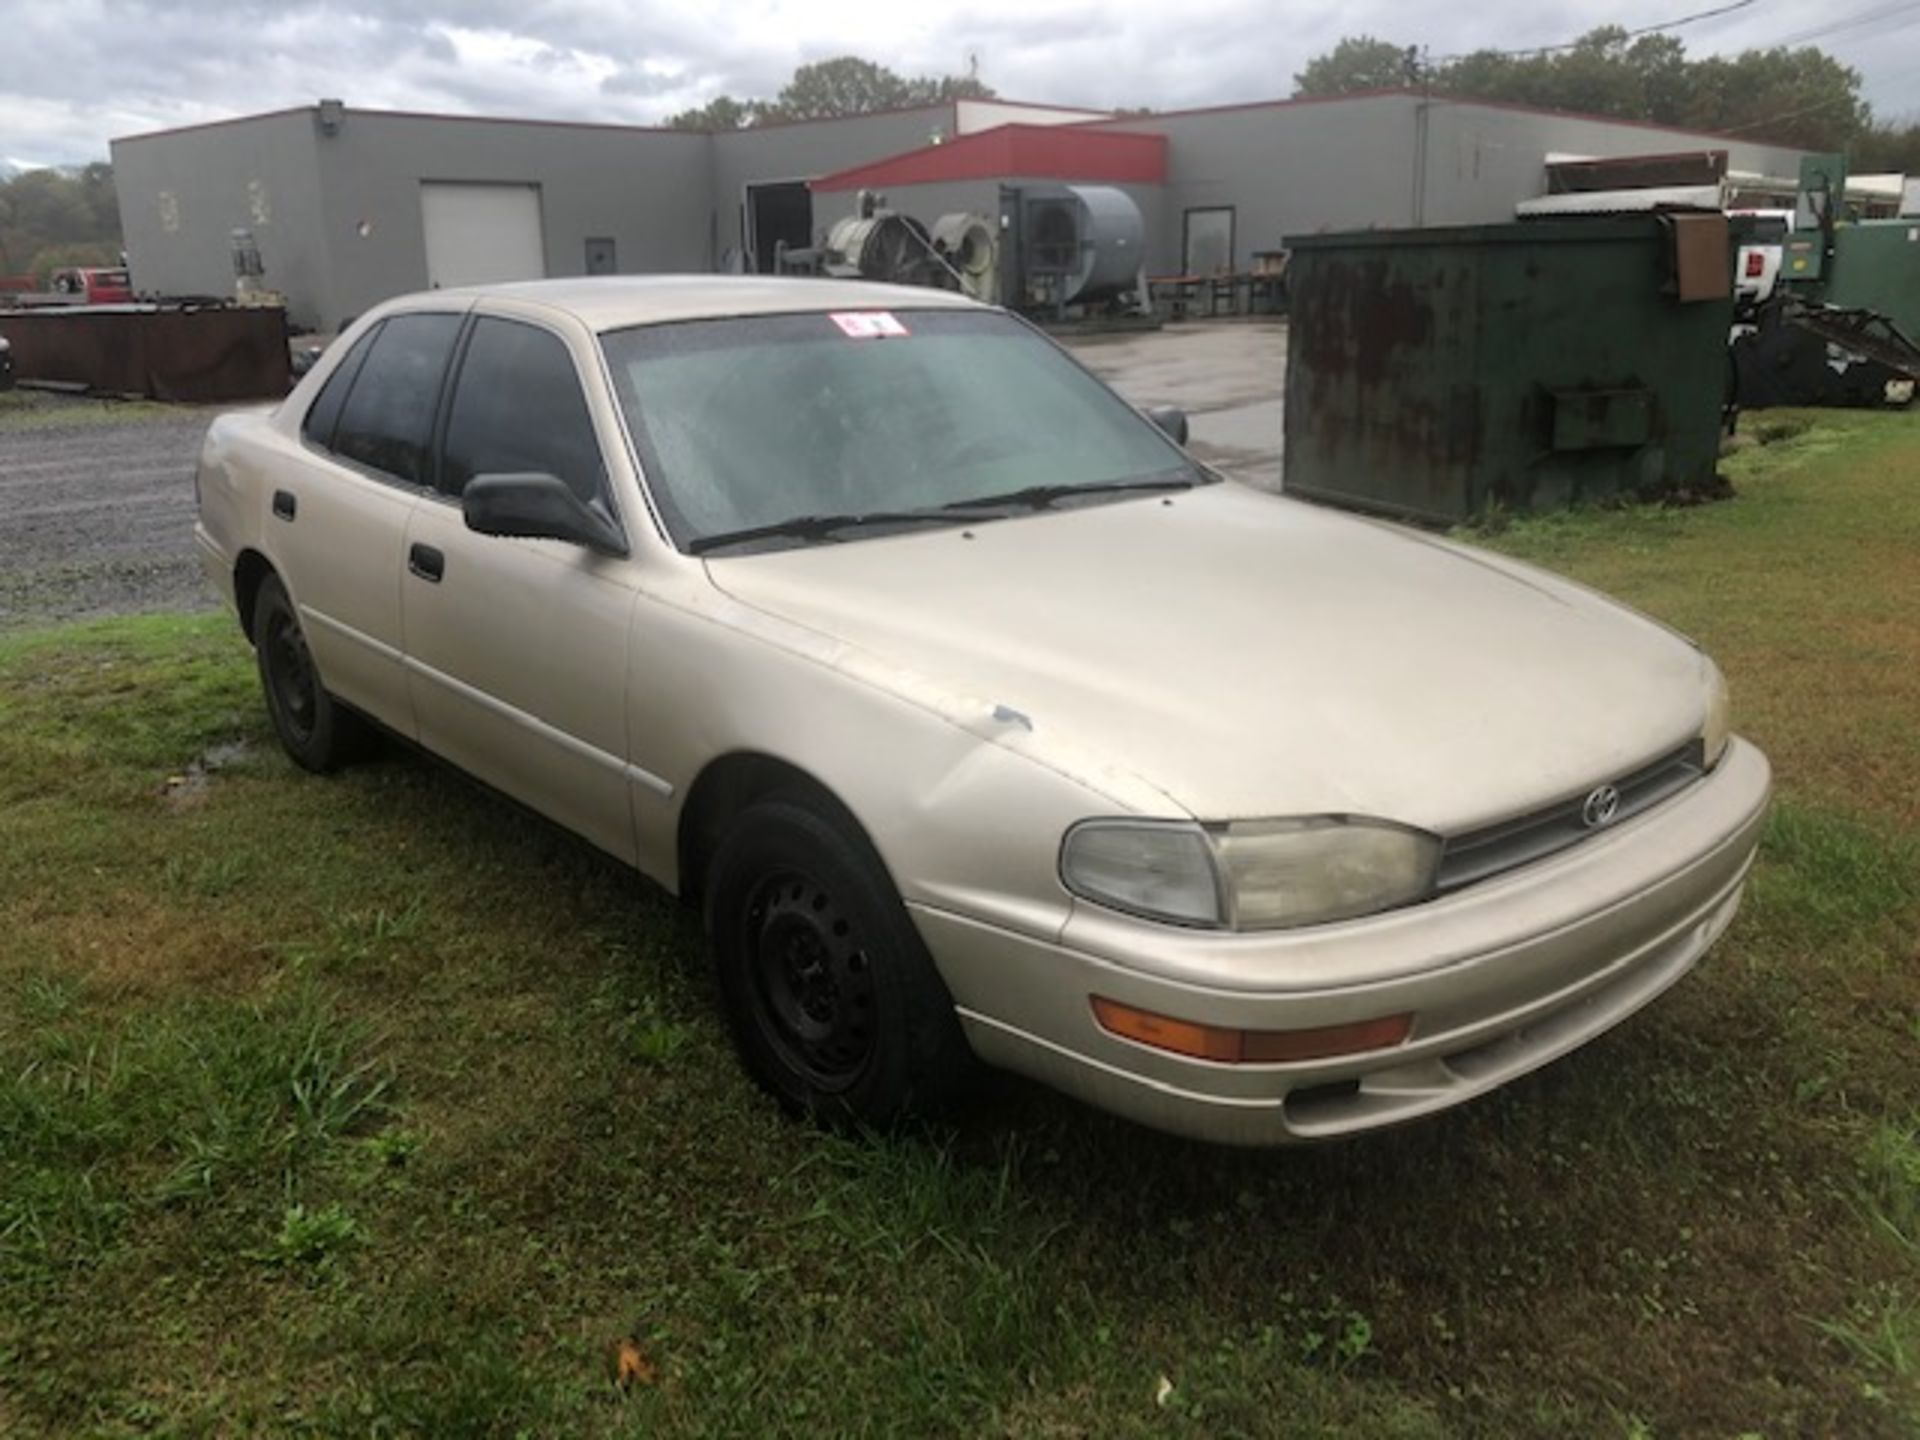 1993 Toyota Camry, 4 Cylinder, 5 Speed, ODO 248,636 Miles, Vin 4T1SK11EXPU179133